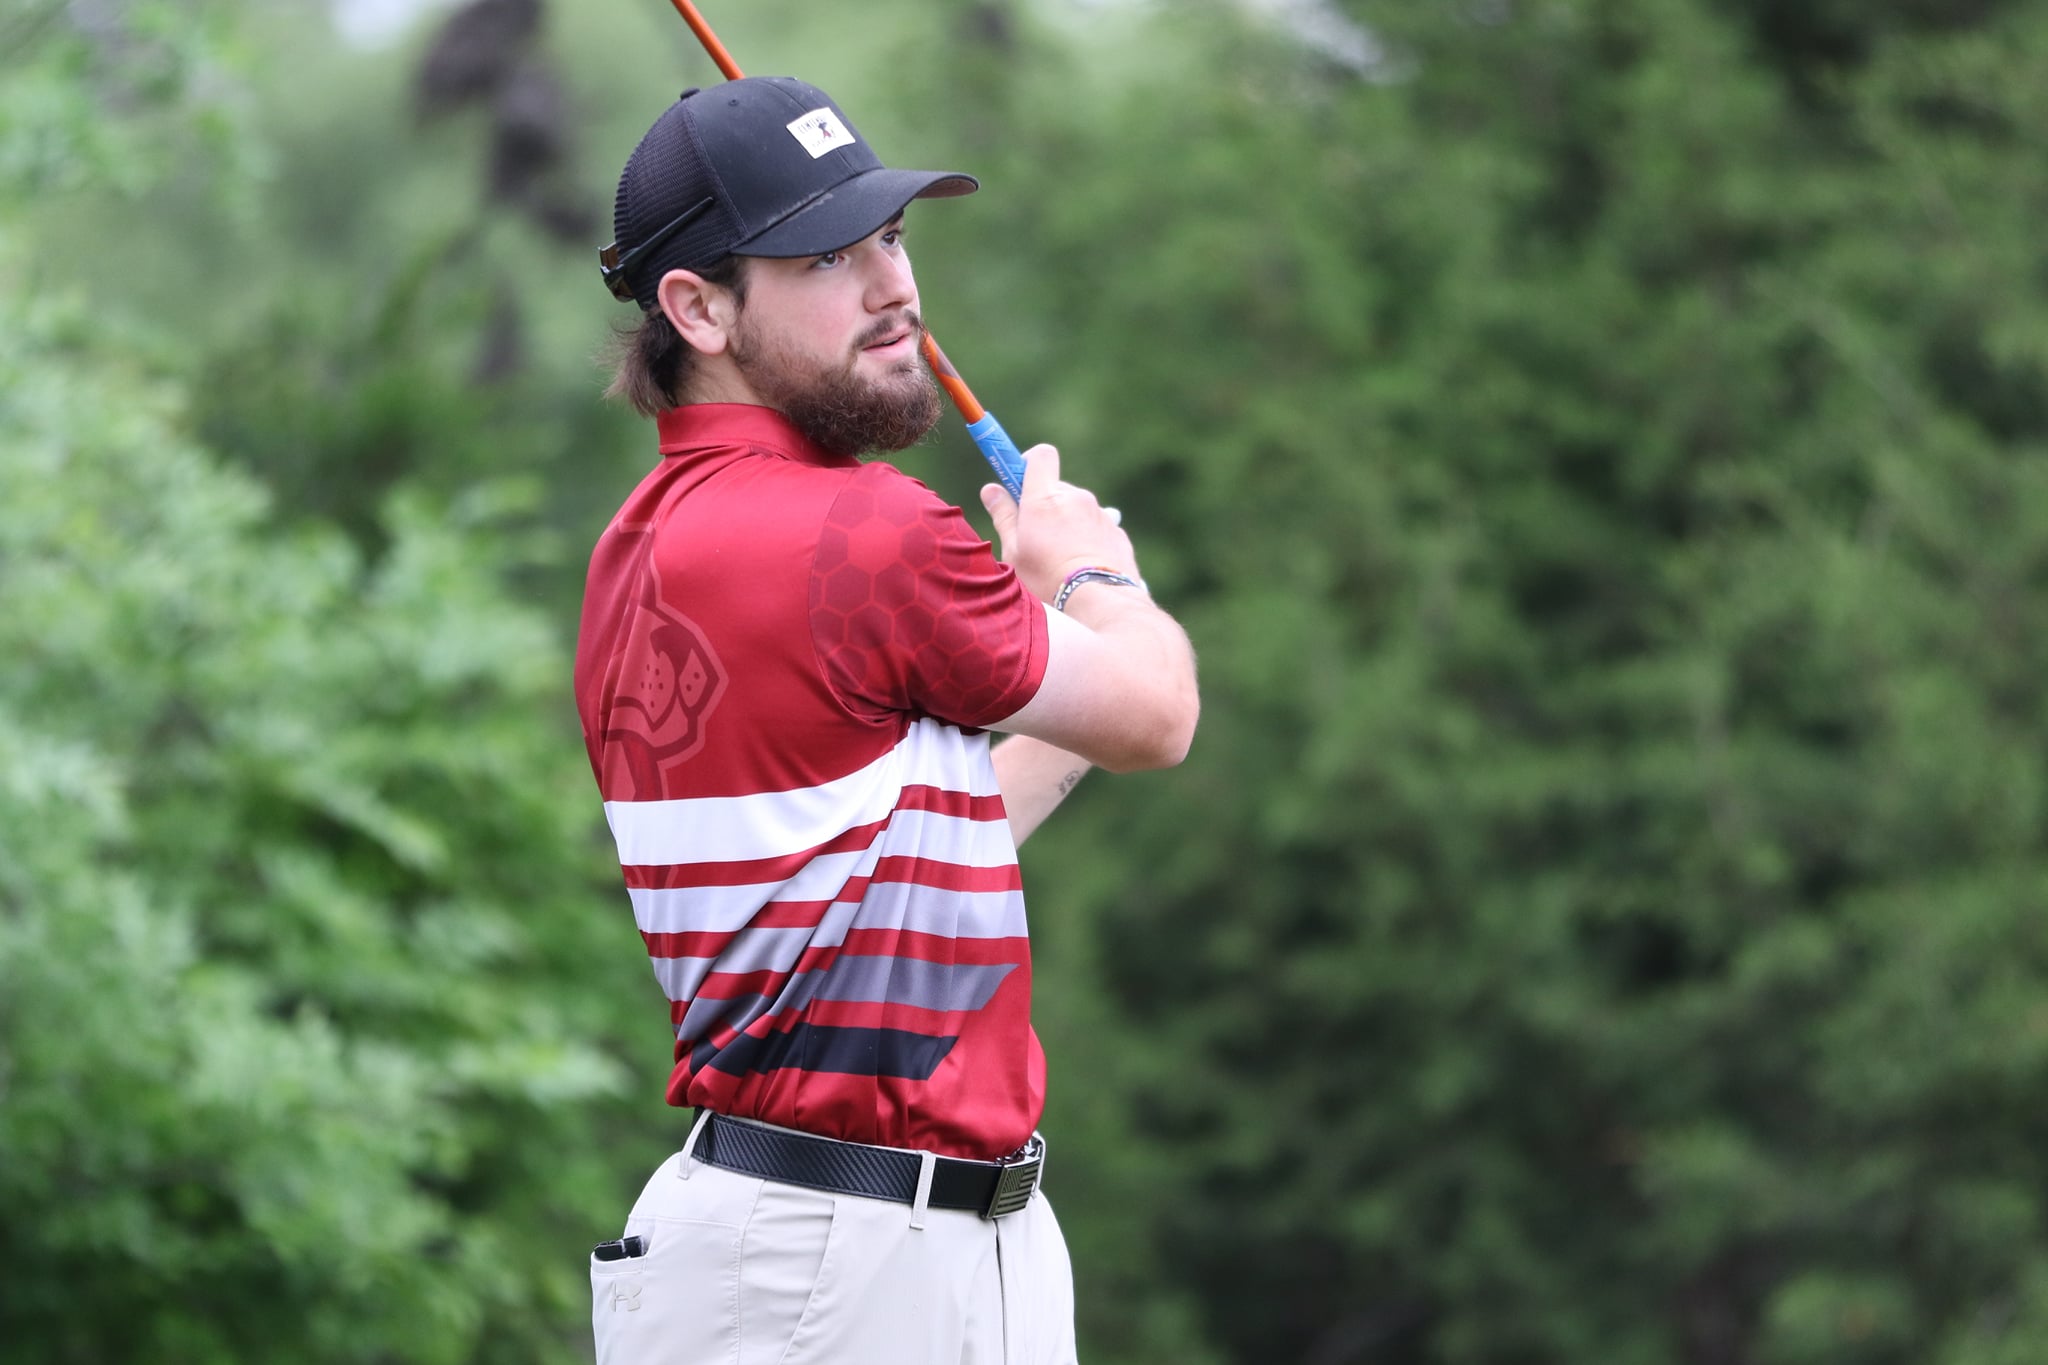 Senior Devan Martin and the Gents finished ninth in their first tournament of the spring season on Tuesday.